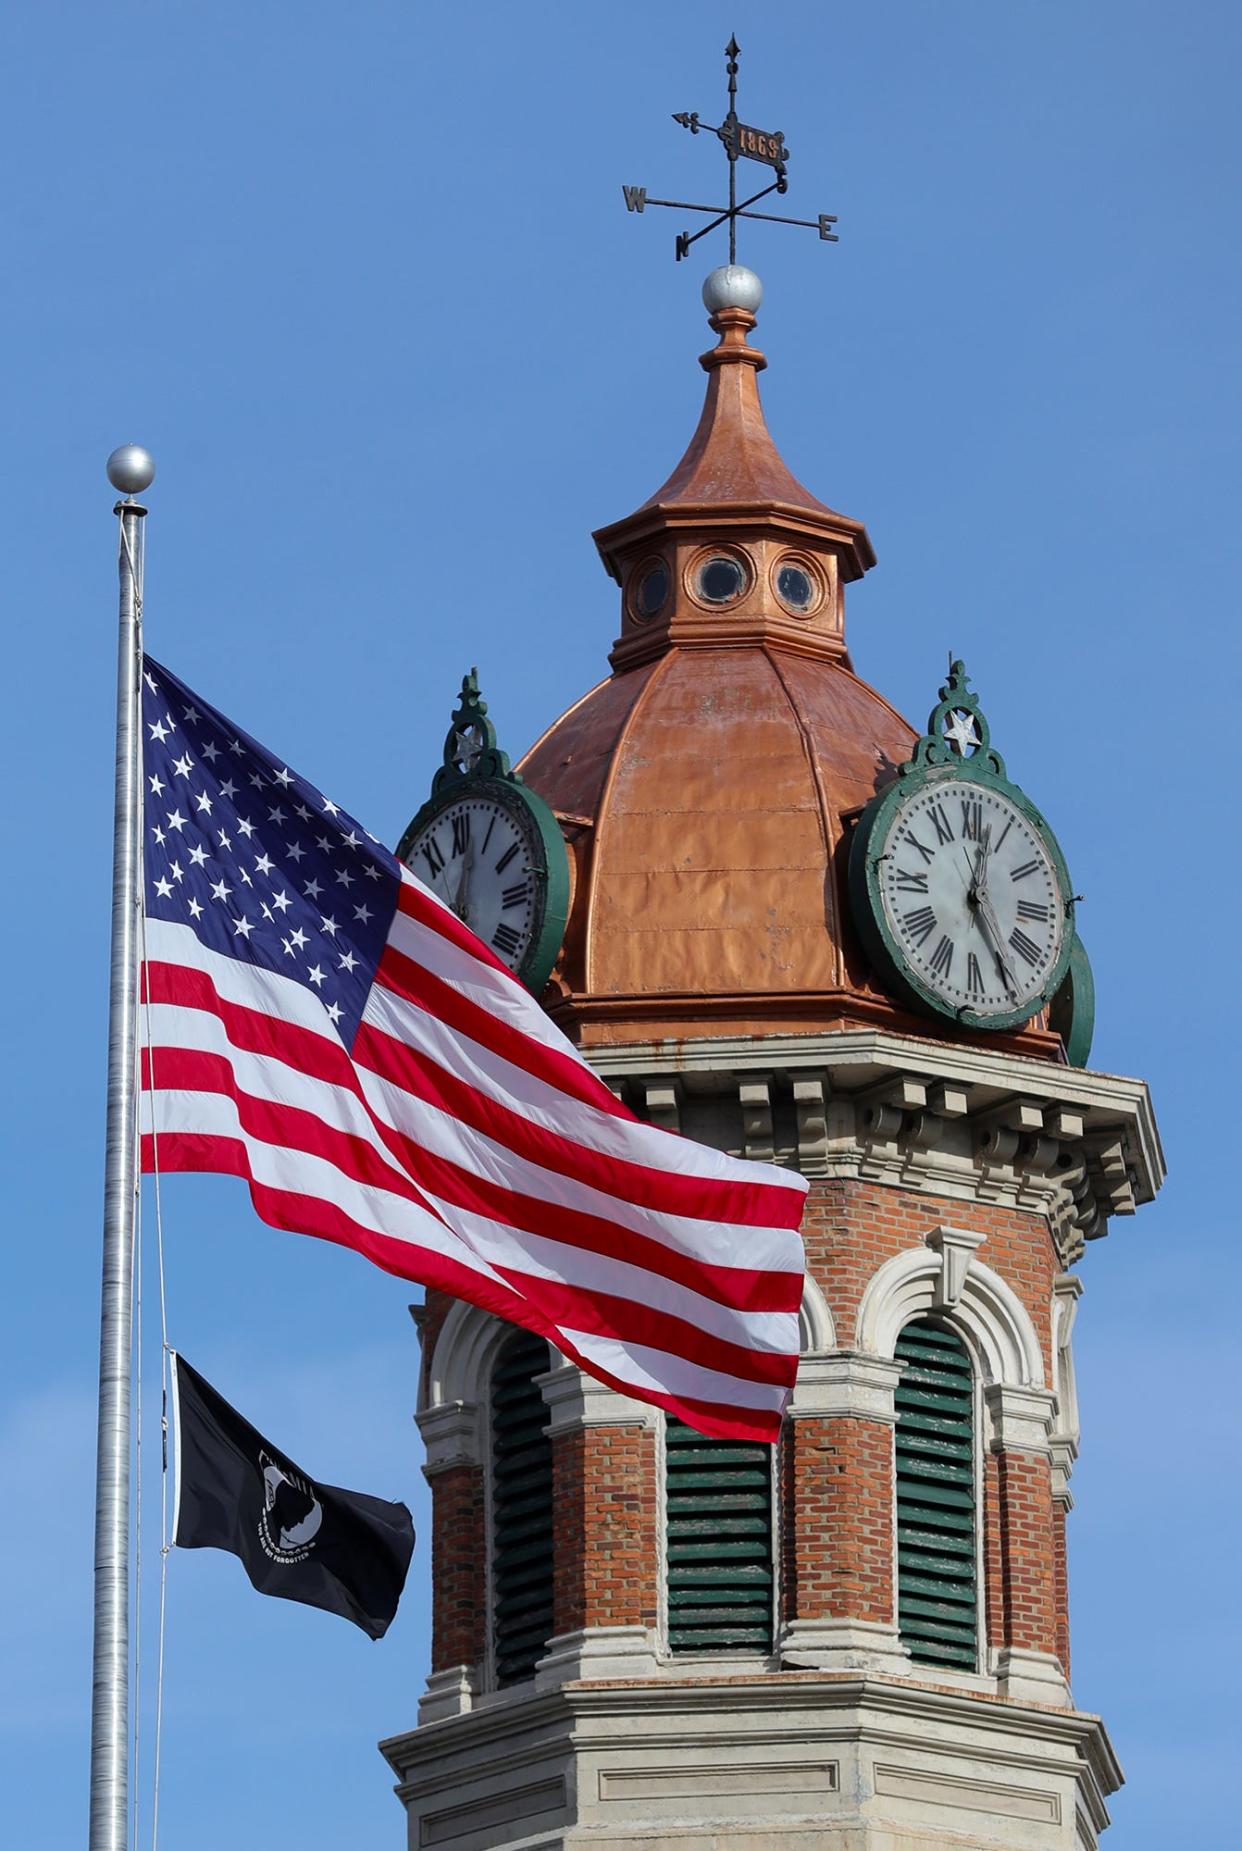 The American flag blows in the wind in front of the Geauga County Courthouse clocktower.